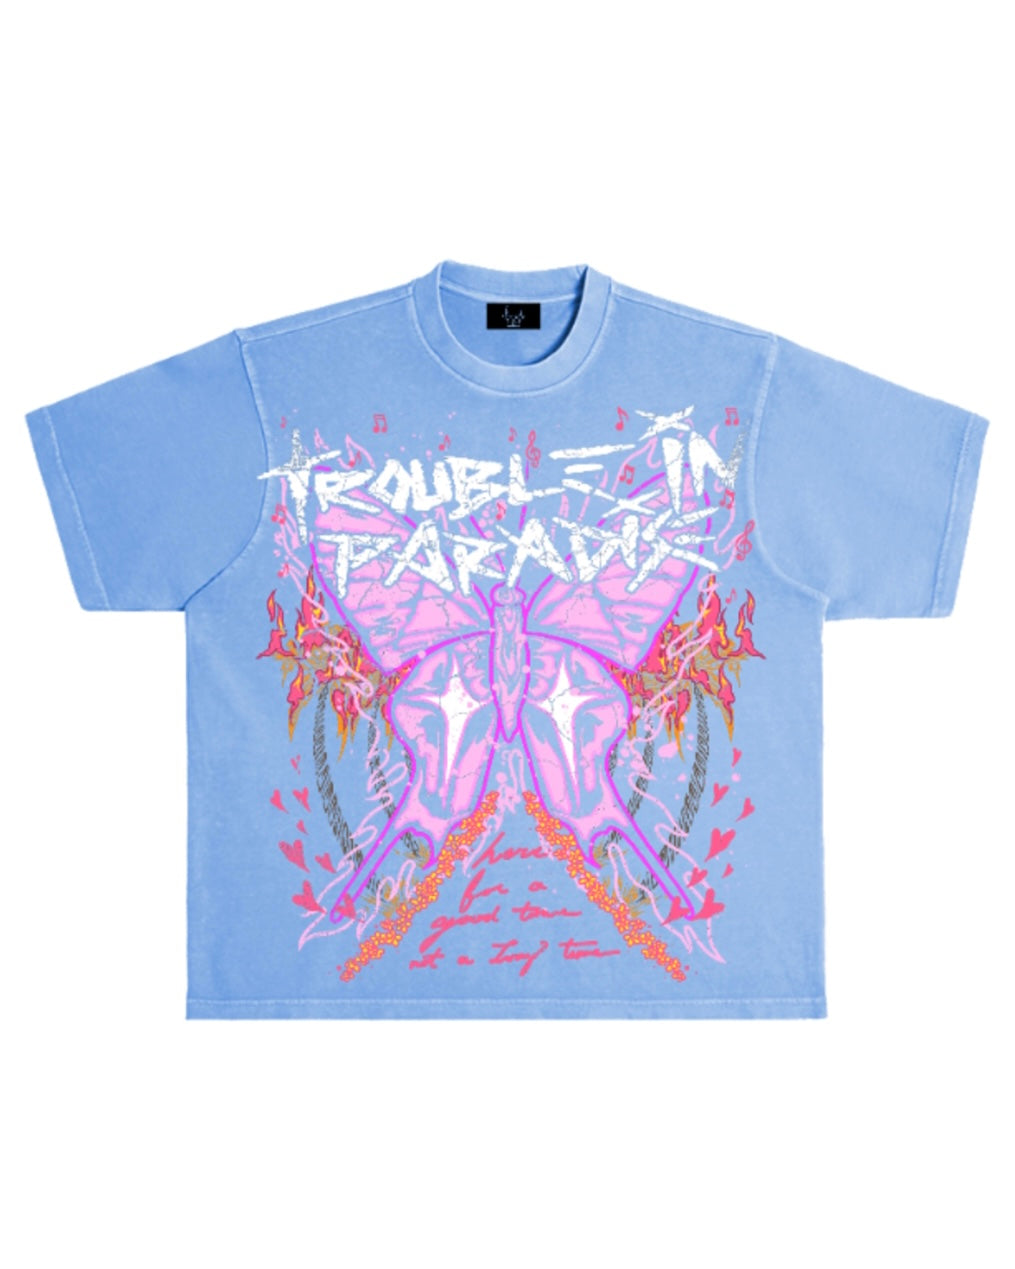 Trouble In Paradise Box Oversized Tee